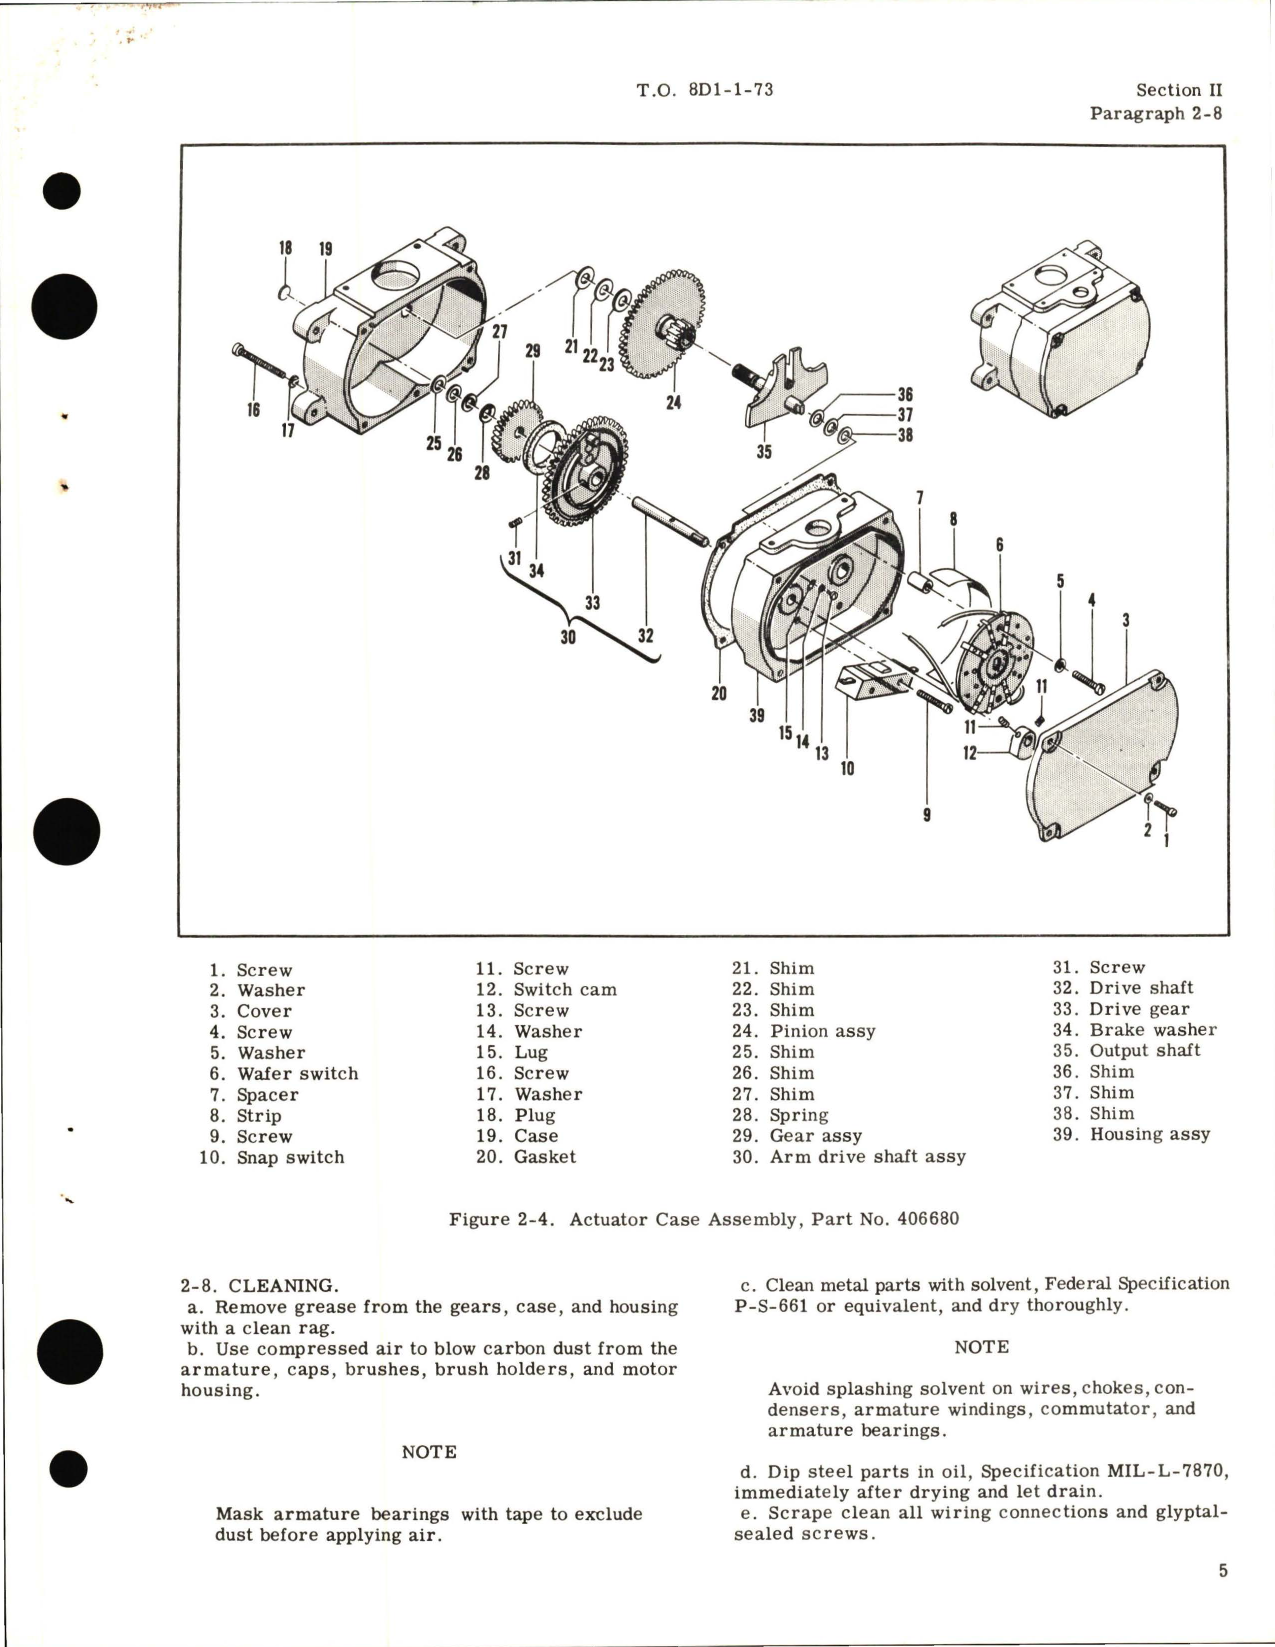 Sample page 7 from AirCorps Library document: Overhaul Instructions for Geneva-Loc Actuators - Series 108 